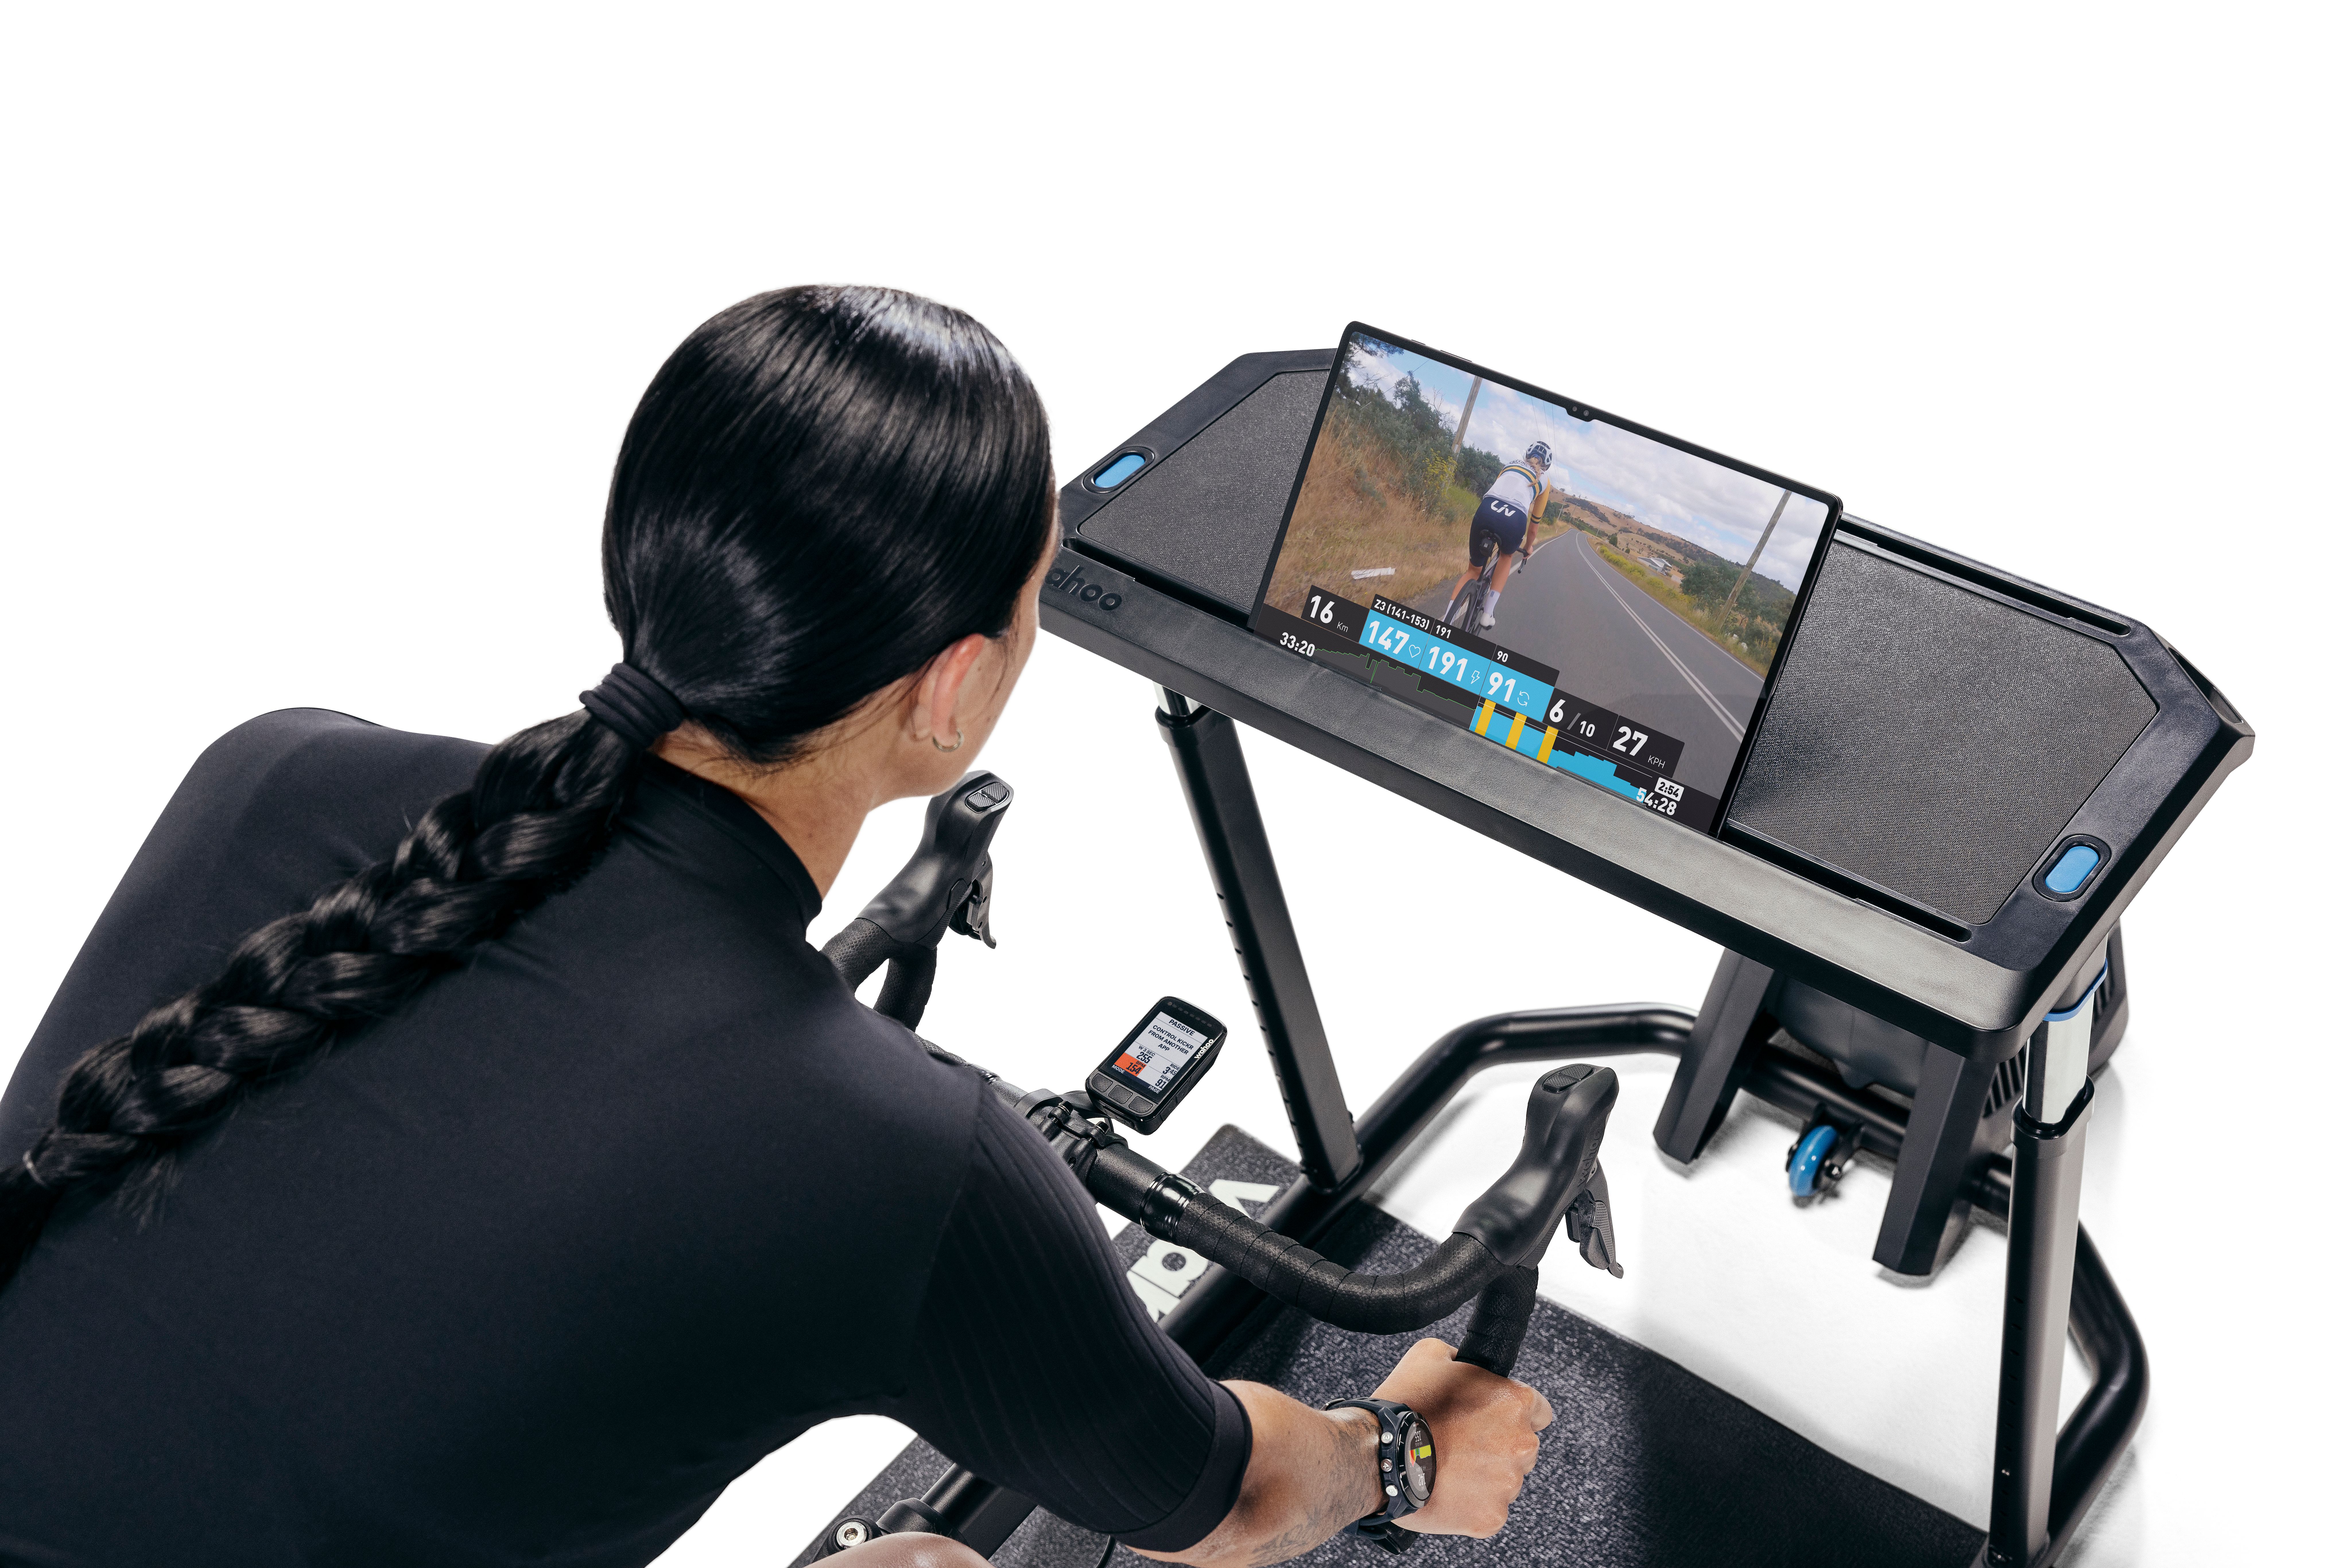 the handlebars on the KICKR BIKE SHIFT look interesting. buttons provide a game controller like feeling.